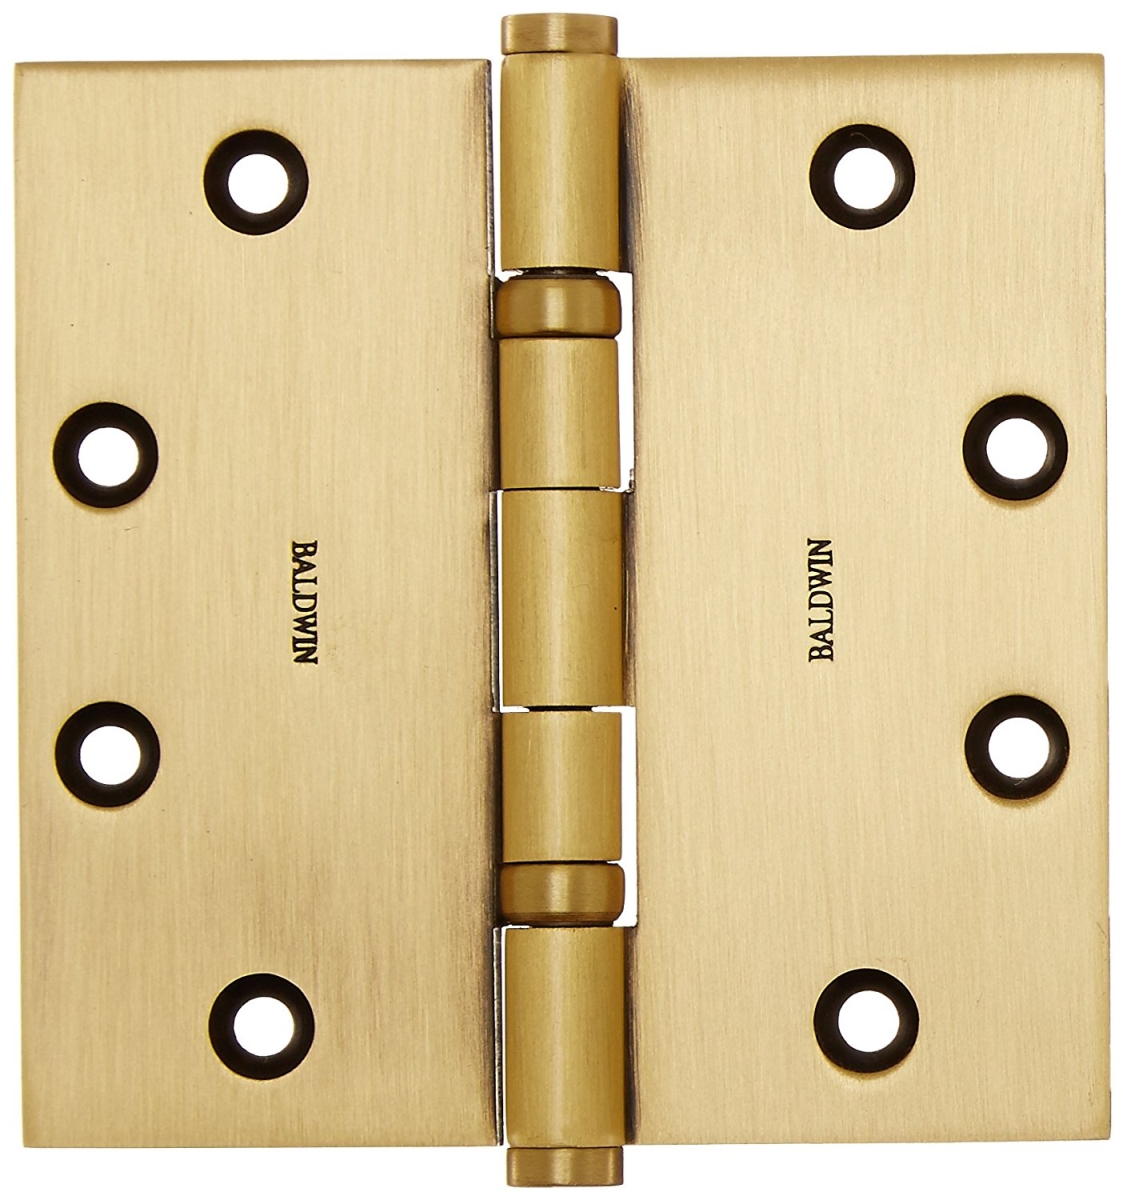 1046060i 4.5 X 4.5 In. Square Ball Bearing Mortise Hinge, Antique Brass With Brown